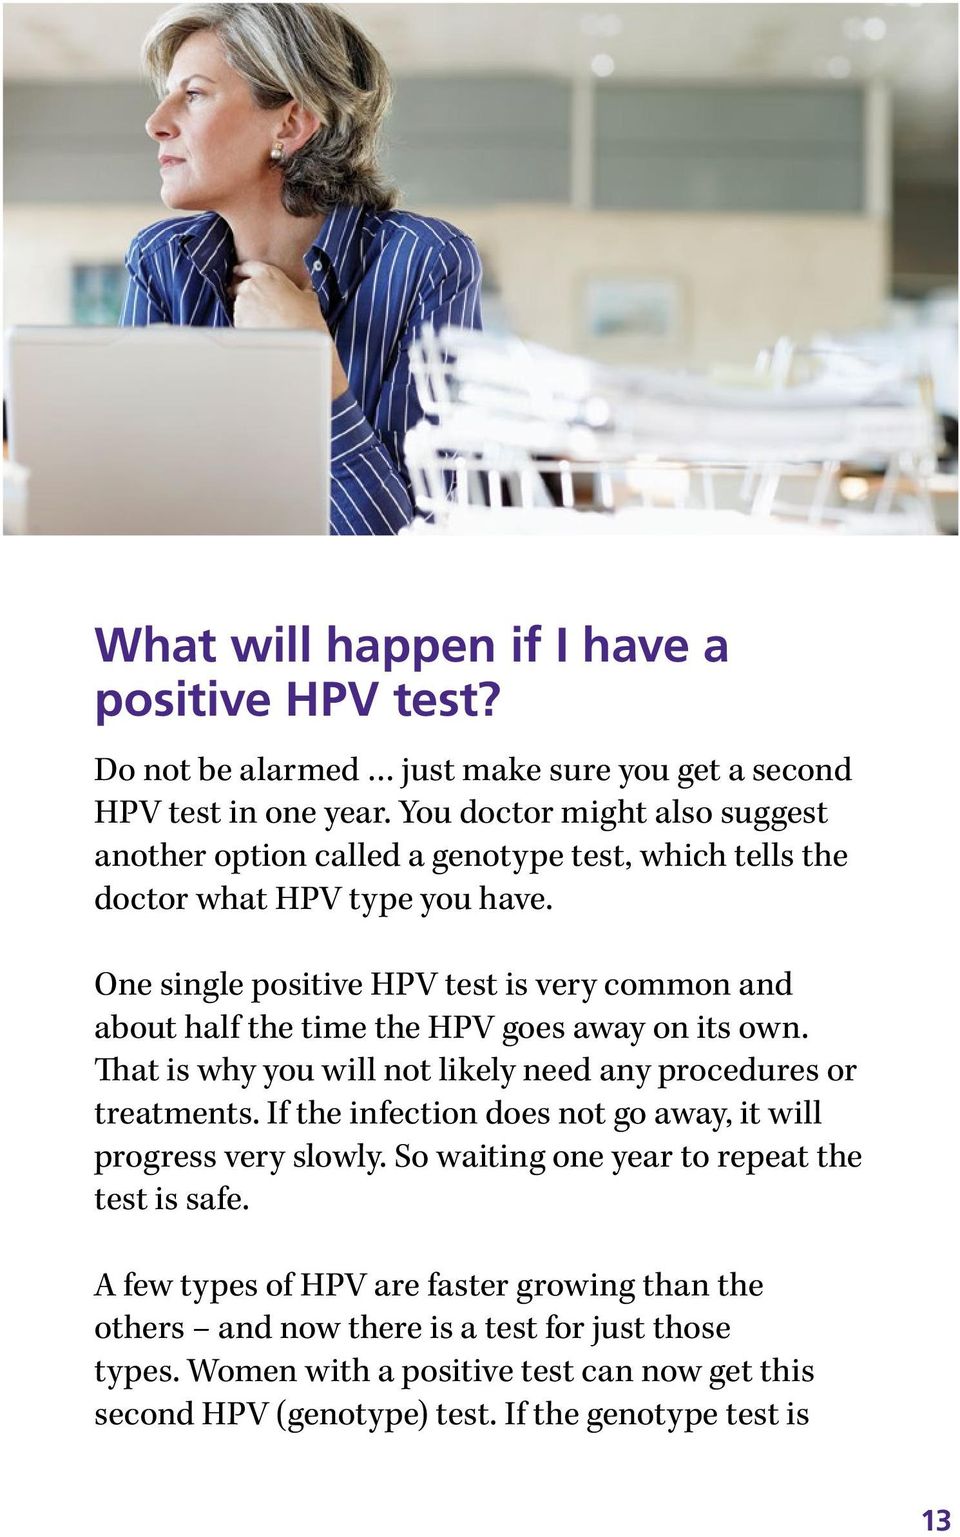 One single positive HPV test is very common and about half the time the HPV goes away on its own. That is why you will not likely need any procedures or treatments.